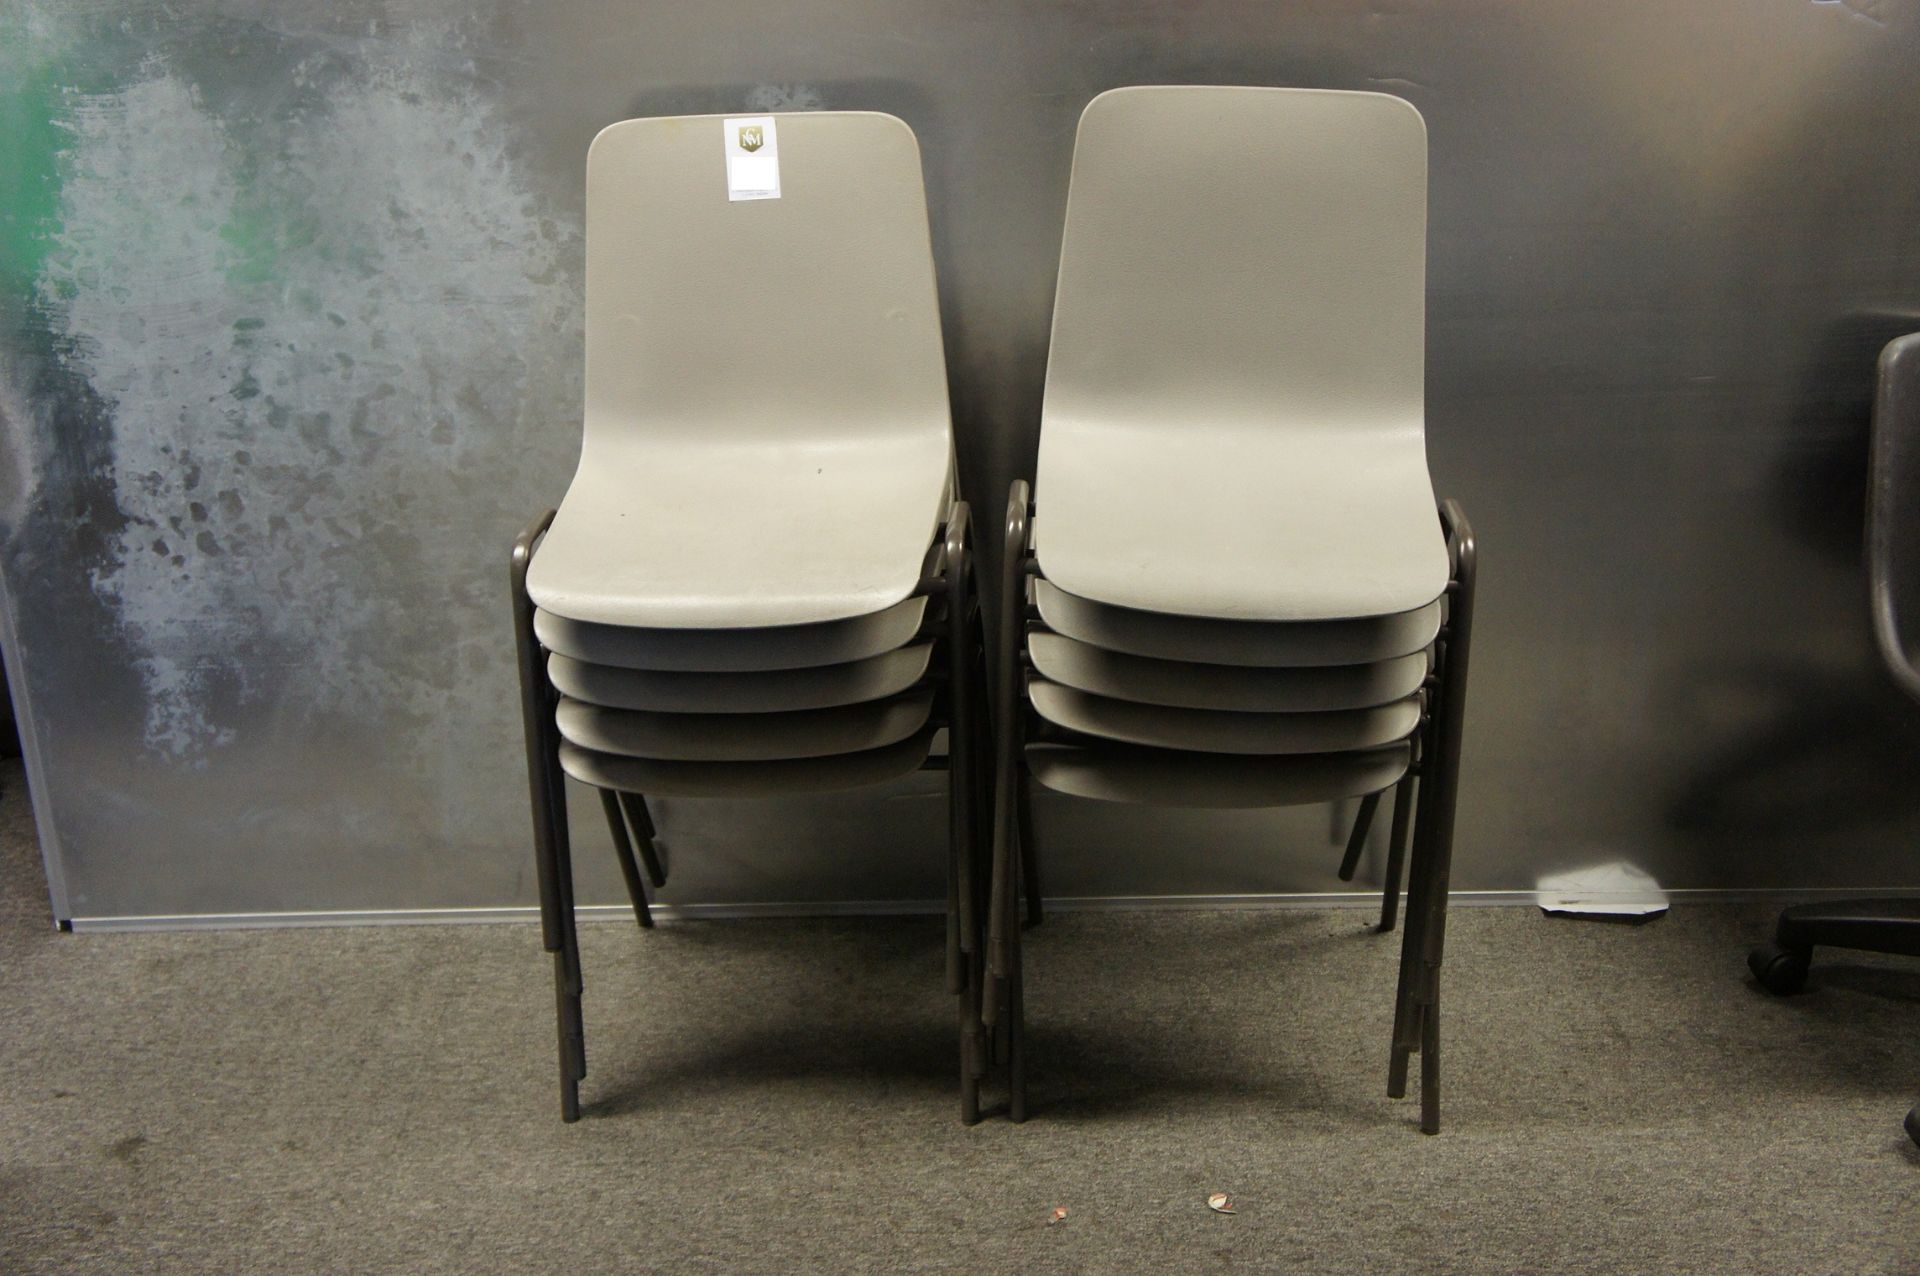 Remploy poly chairs (10)